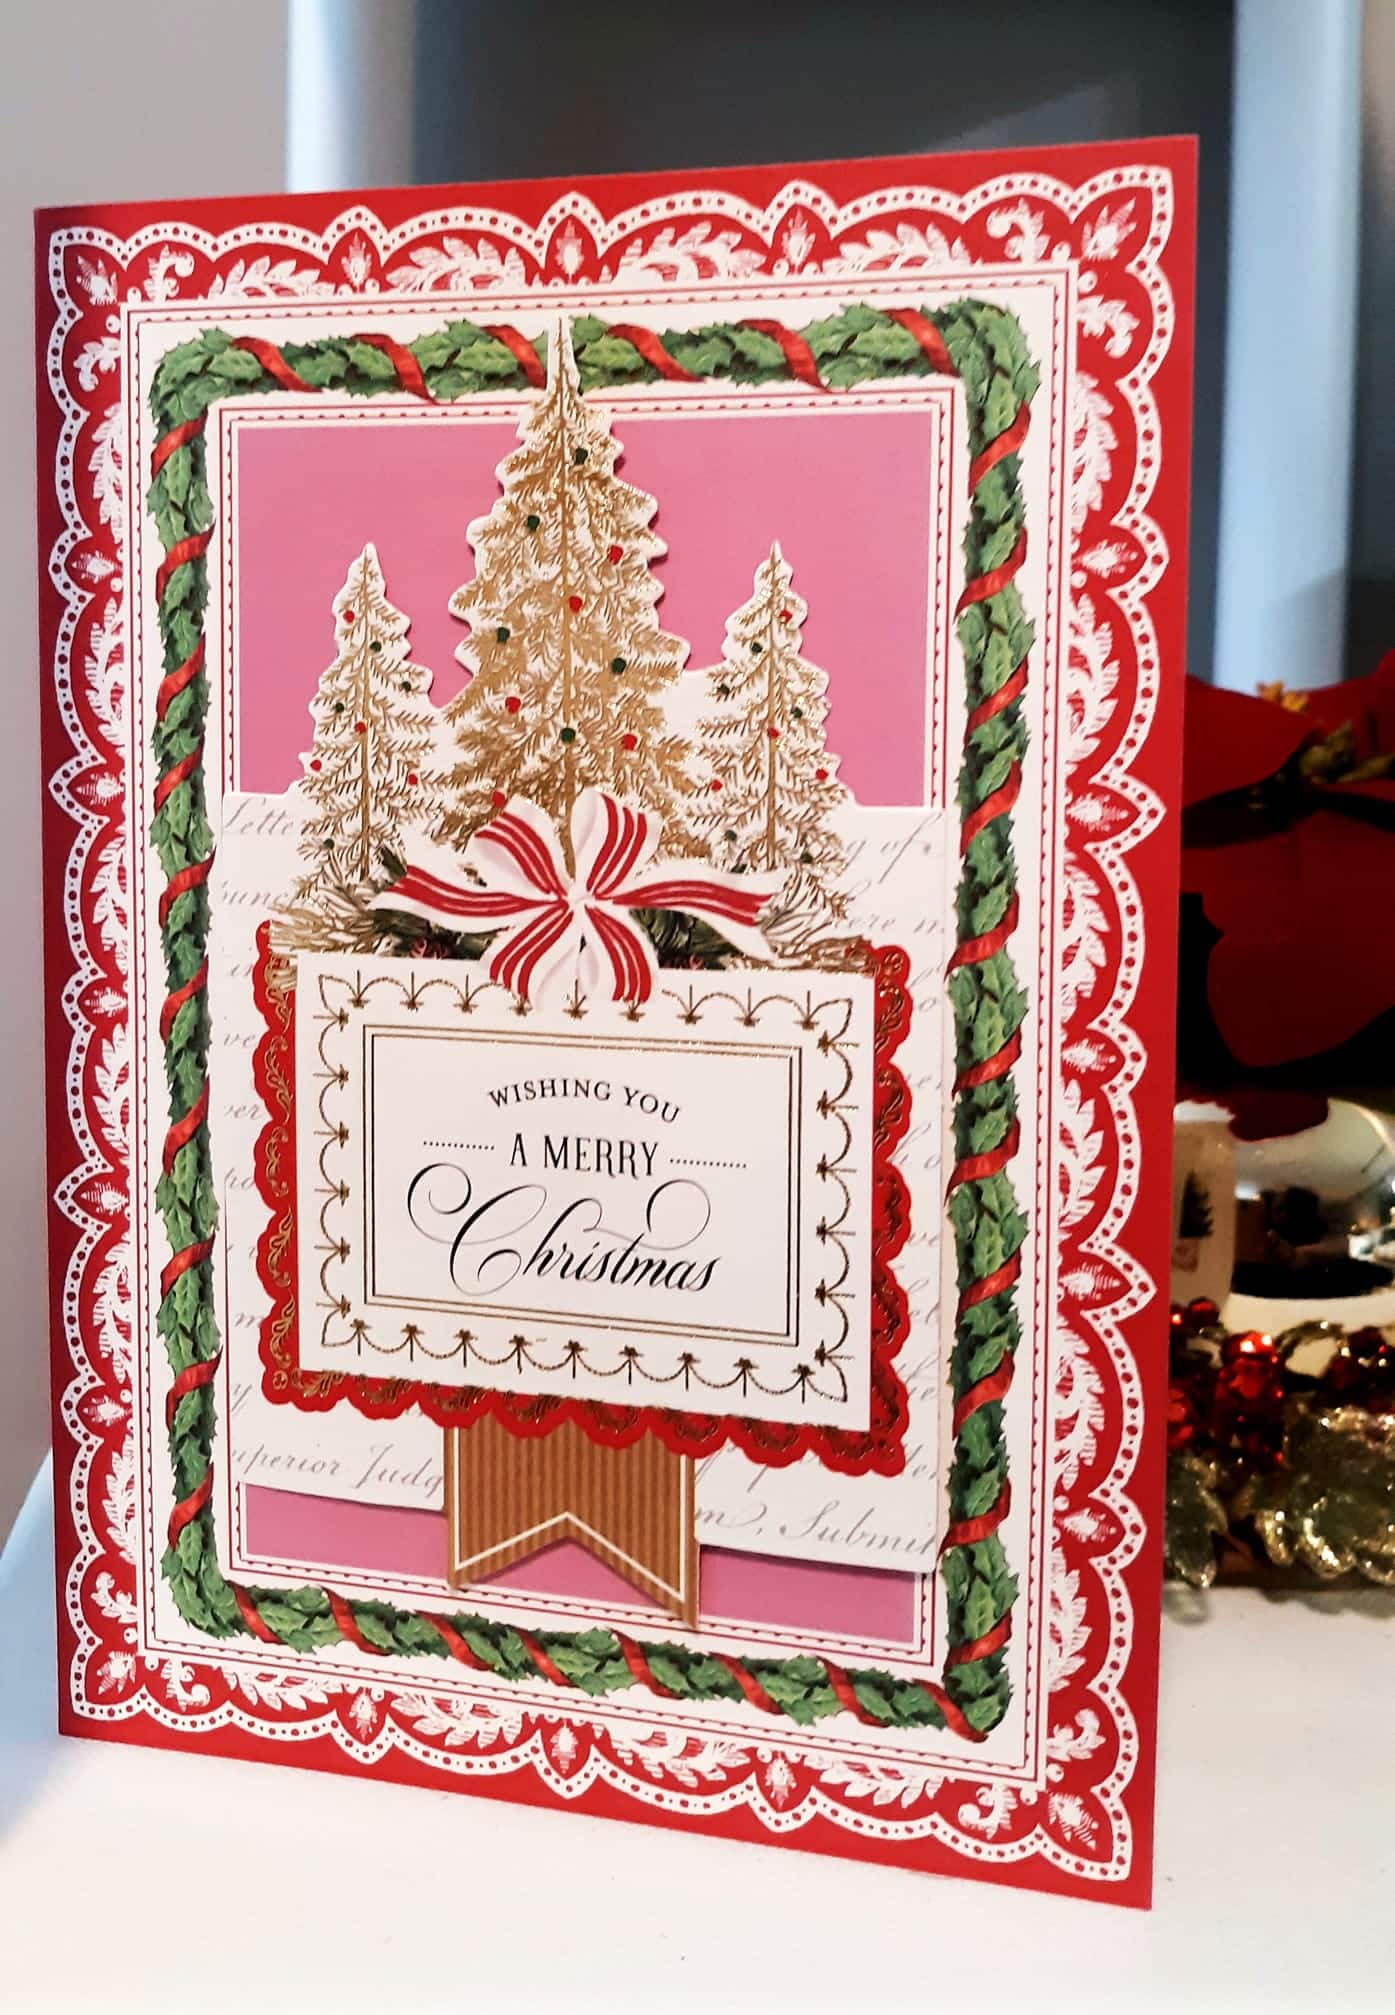 A christmas card with a gold and red border.